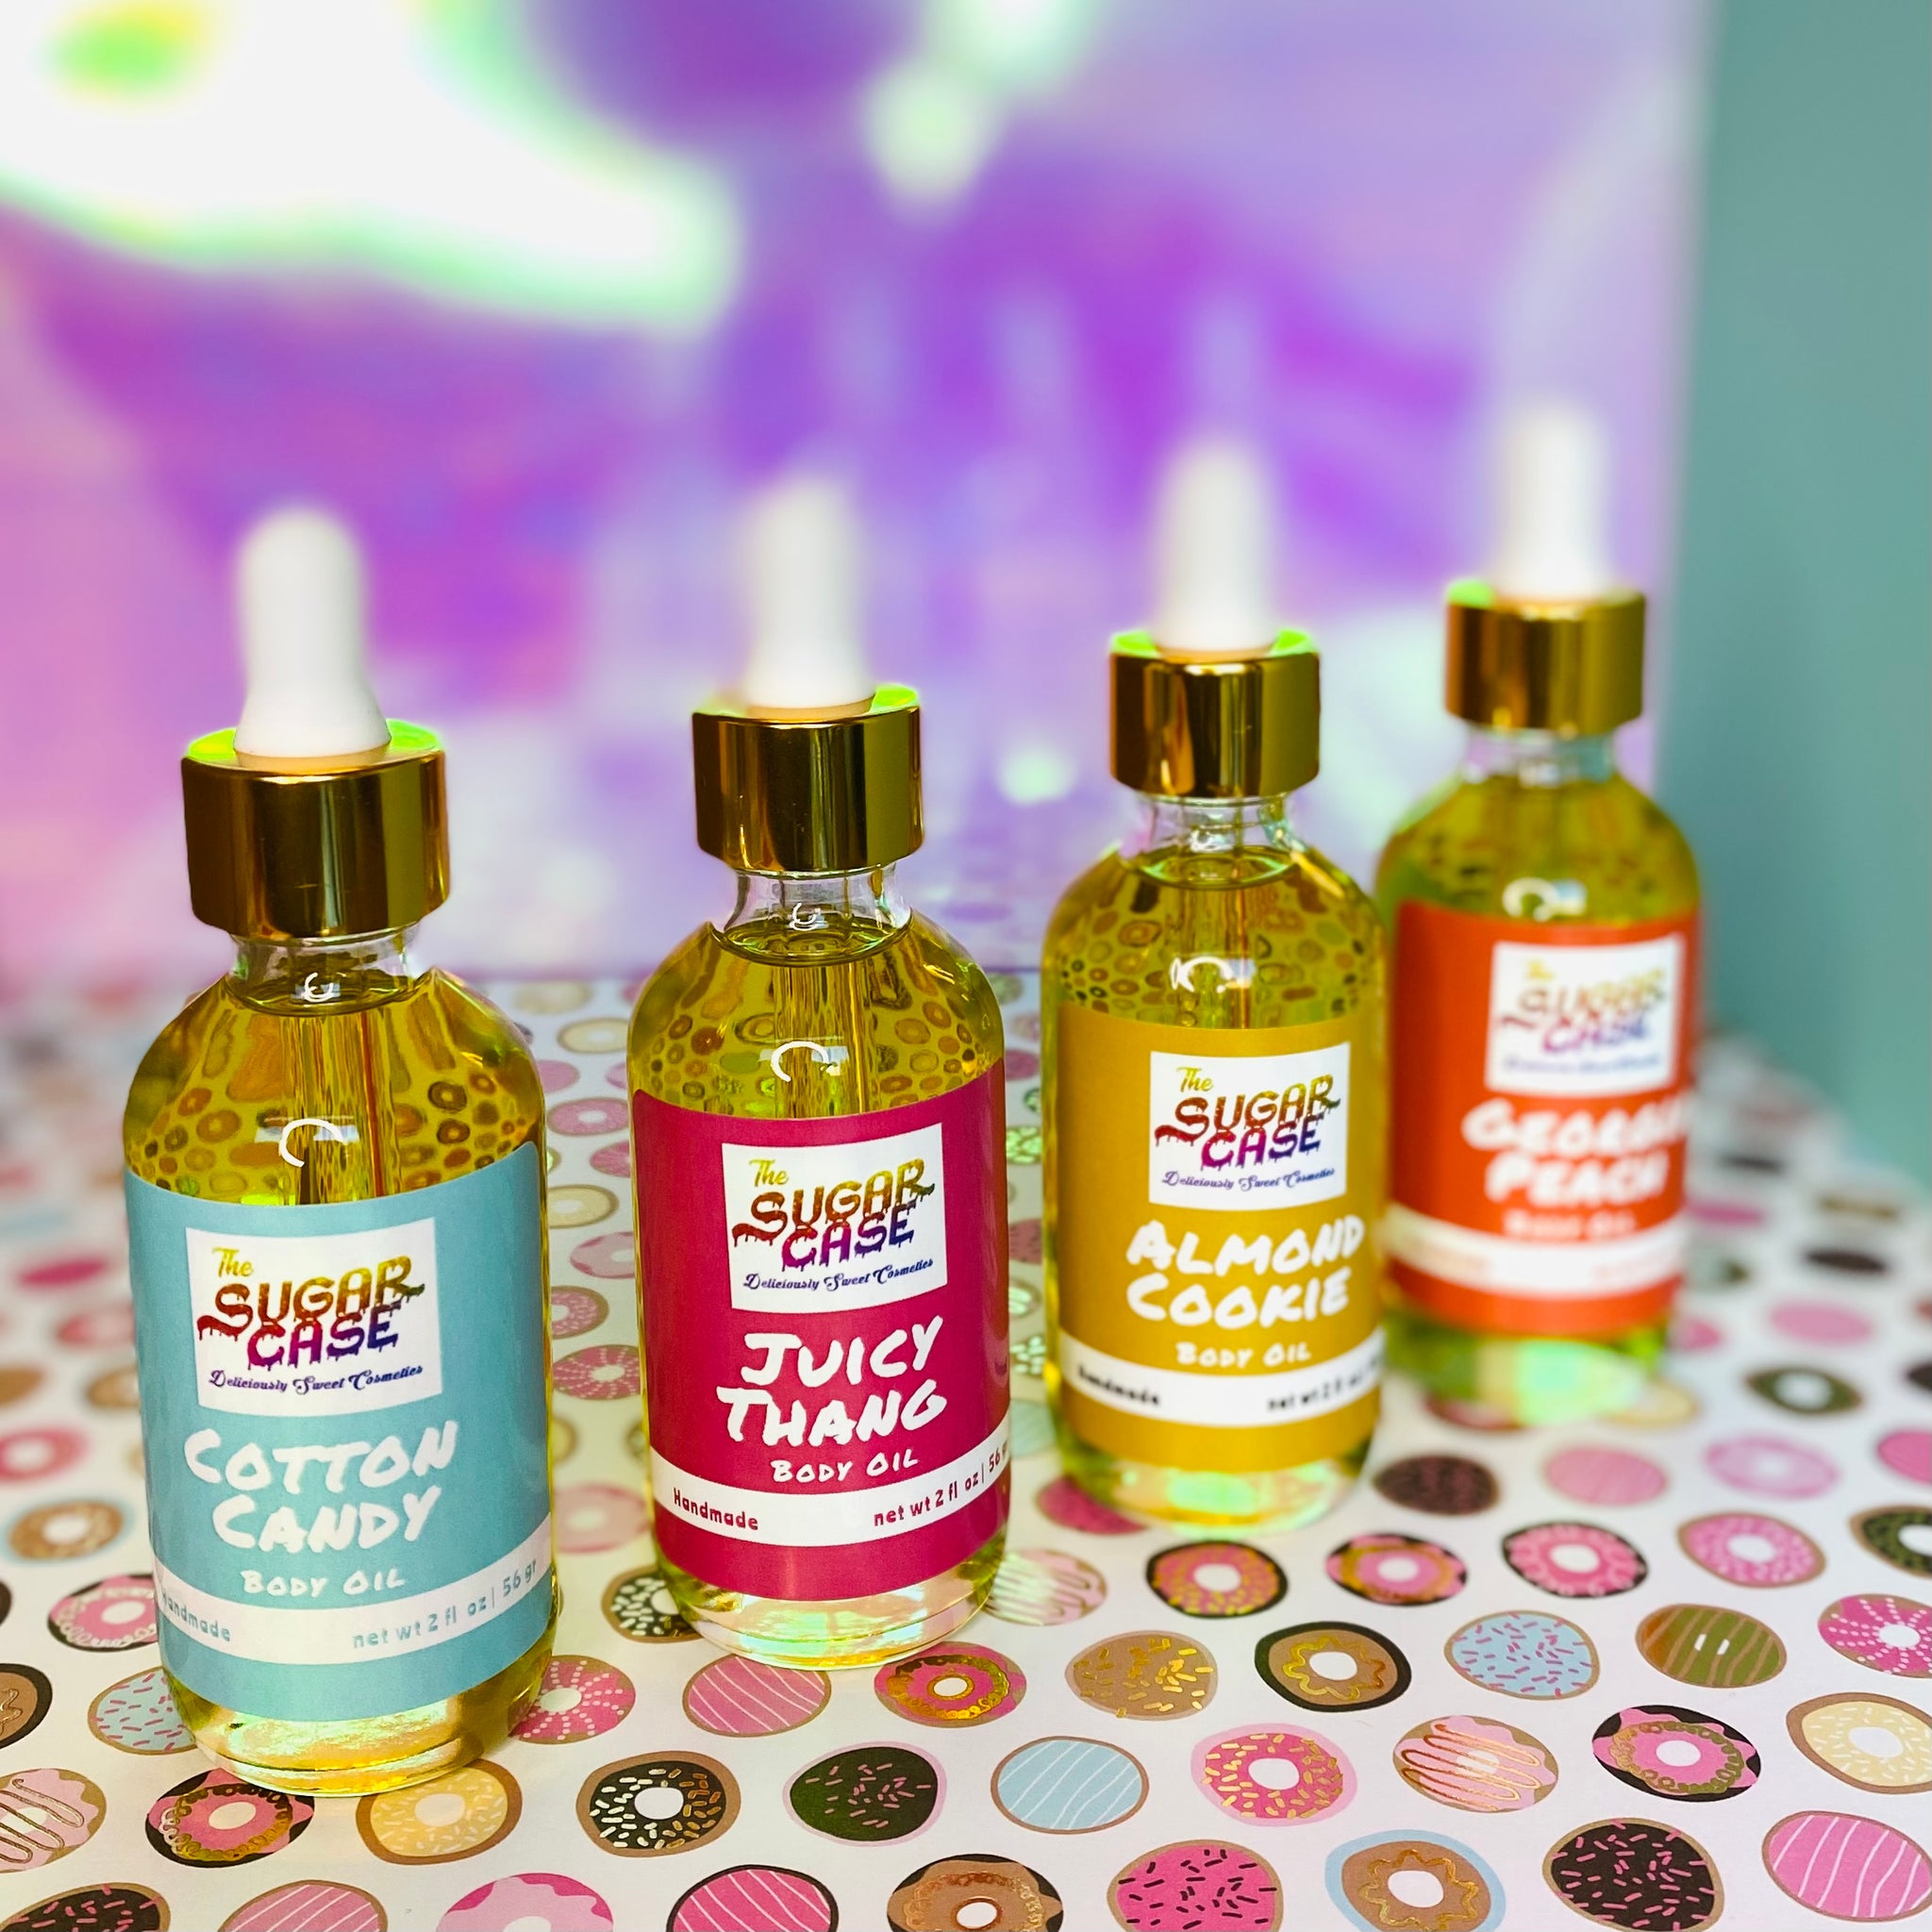 Cotton Candy Fro: My Essential Oil Collection